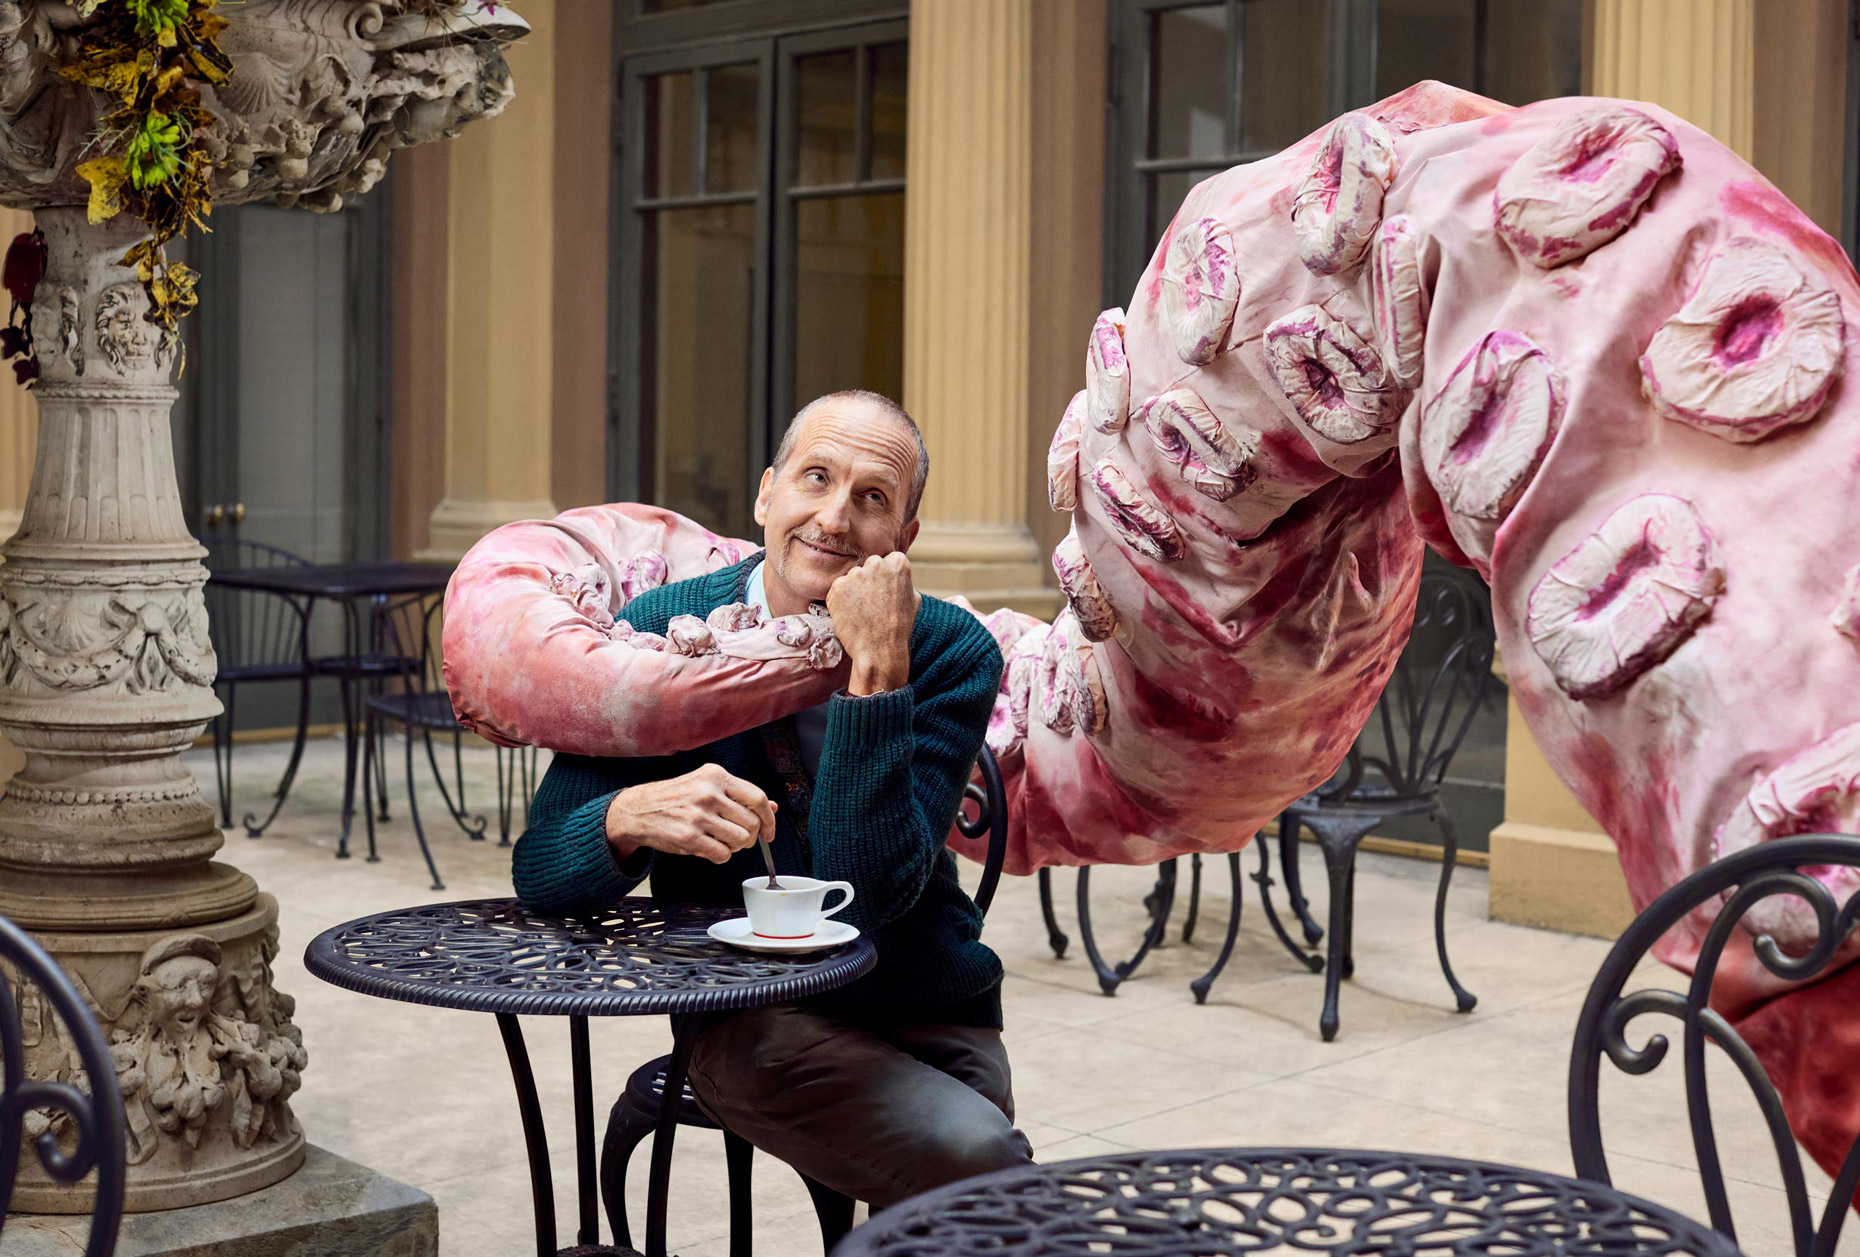 Man in love with an octopus | conceptual photography by Saverio Truglia